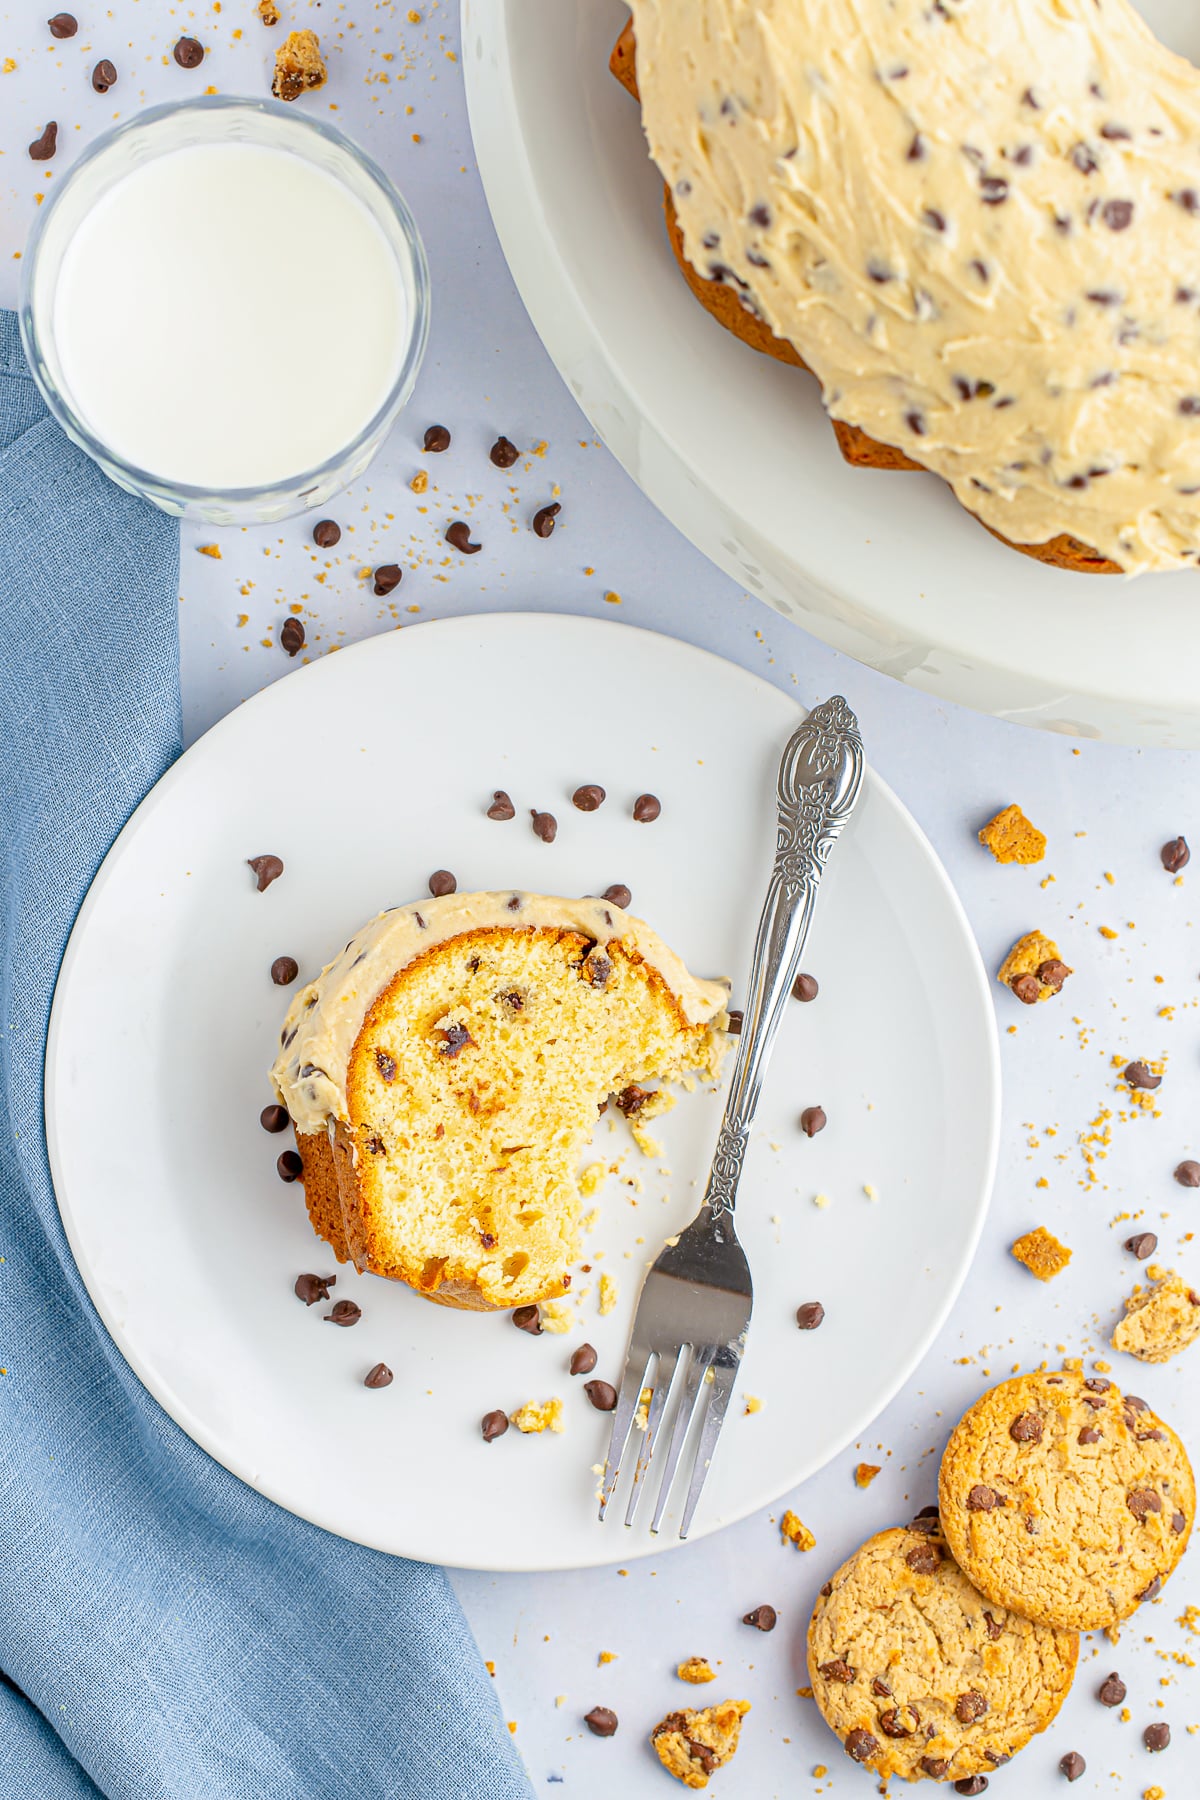 Overhead image of a slice of chocolate chip bundt cake on a white plate, the remainder of the cake on a white cake stand, glass of milk, blue linen and cookie crumbs